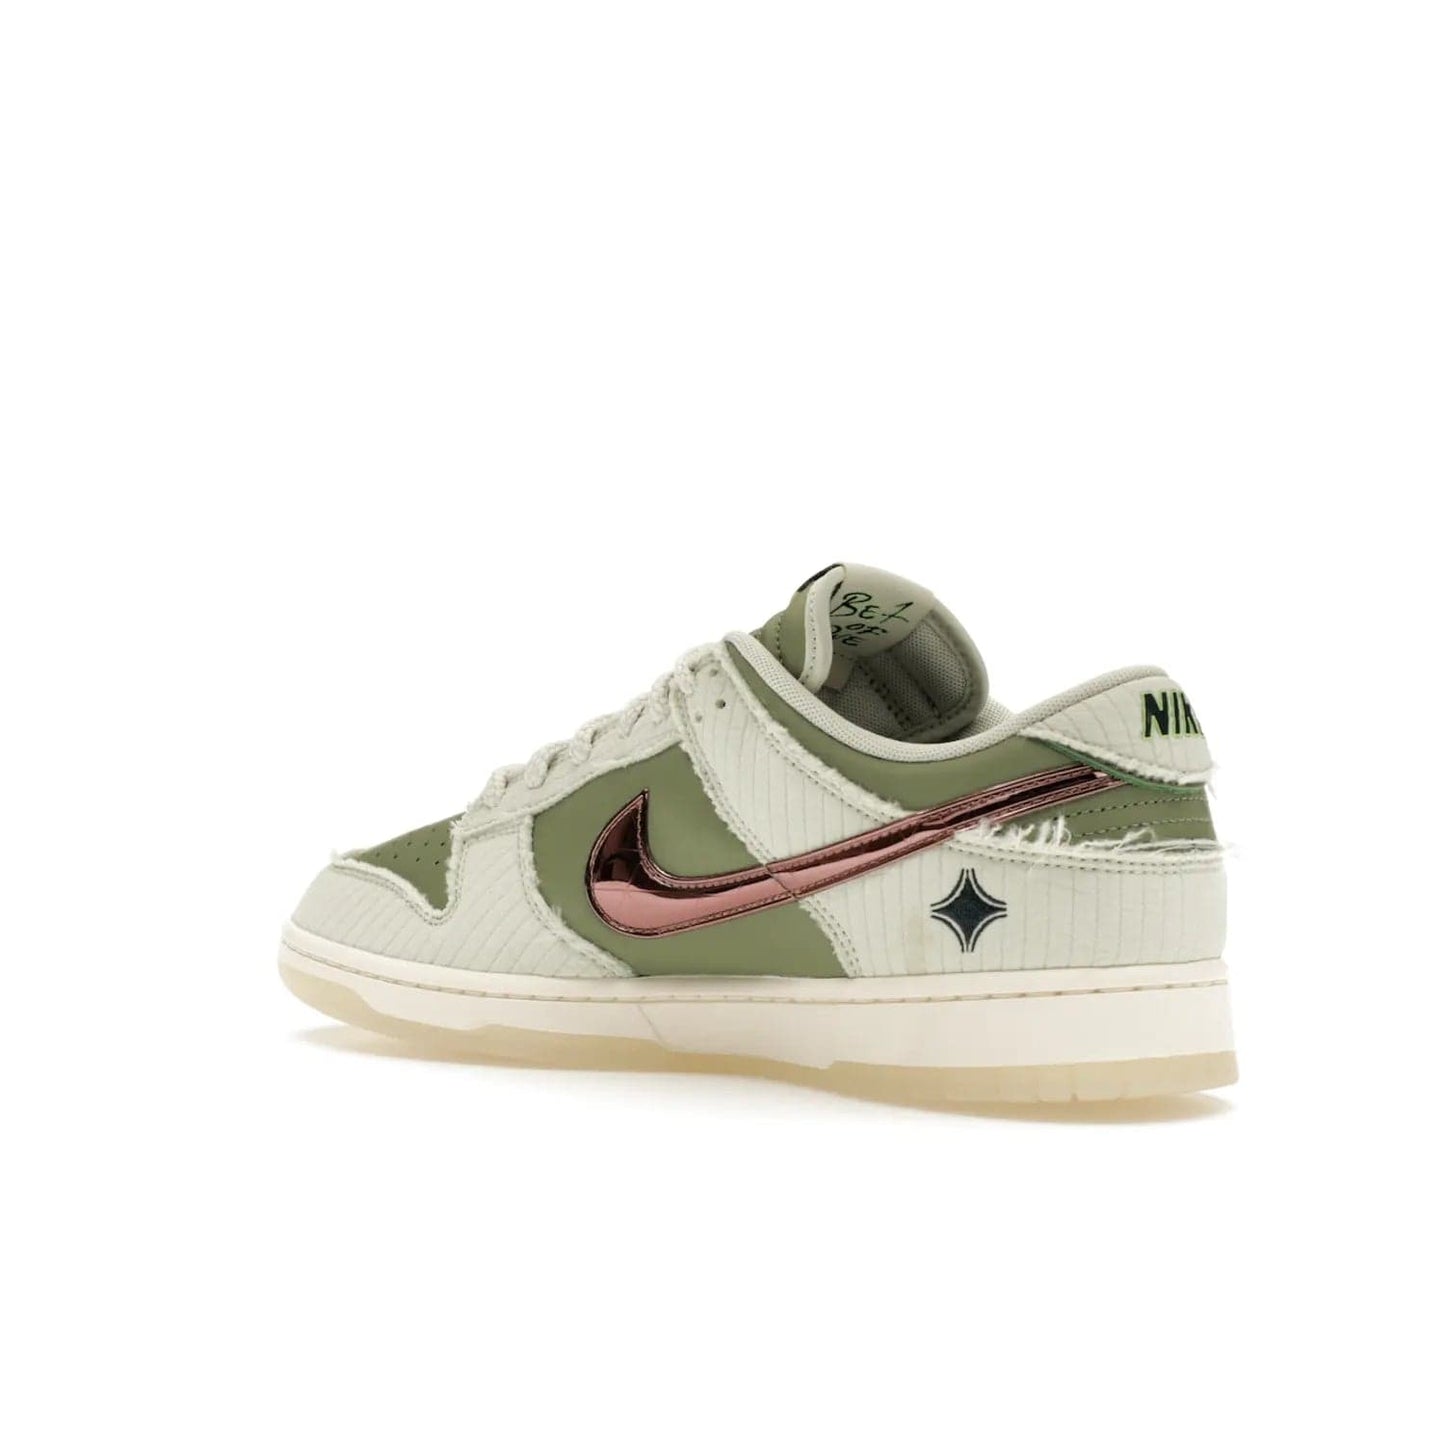 Nike Dunk Low Retro PRM Kyler Murray Be 1 of One - Image 23 - Only at www.BallersClubKickz.com - Introducing the Nike Dunk Low Retro PRM Kyler Murray "Be 1 of One"! A Sea Glass upper with Sail and Oil Green accents, finished with Rose Gold accents. Drop date: November 10th.